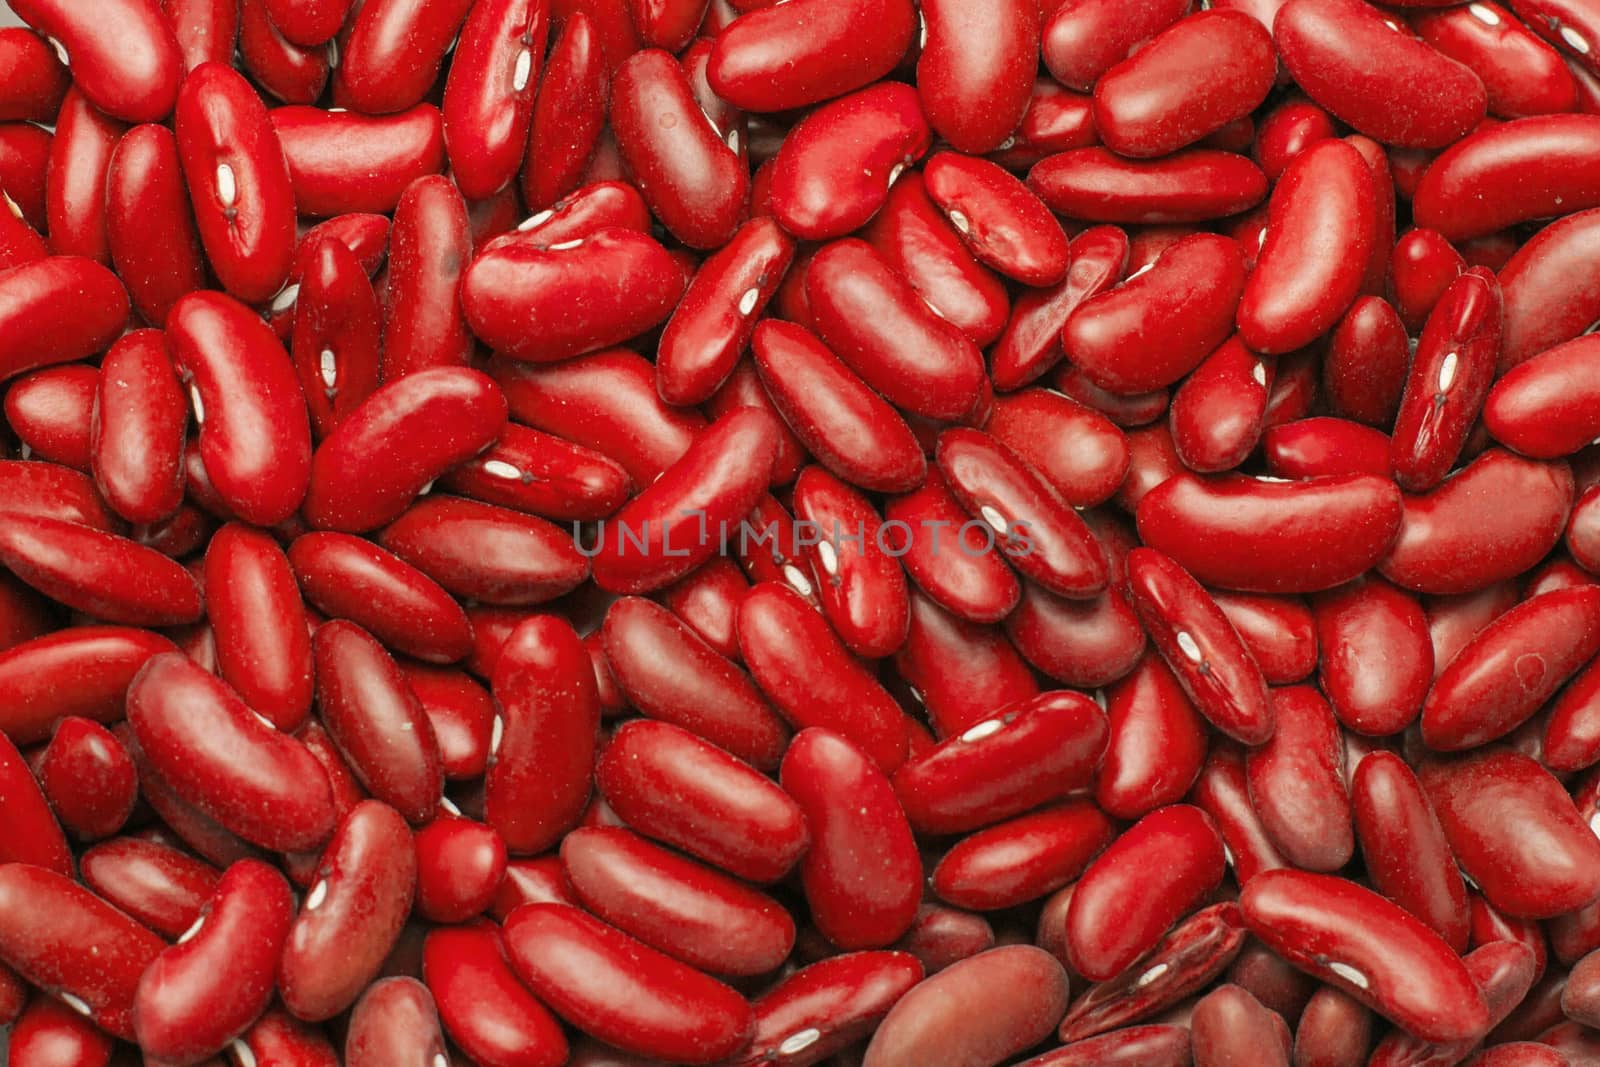 background, texture of red beans in a scattering of food legumes